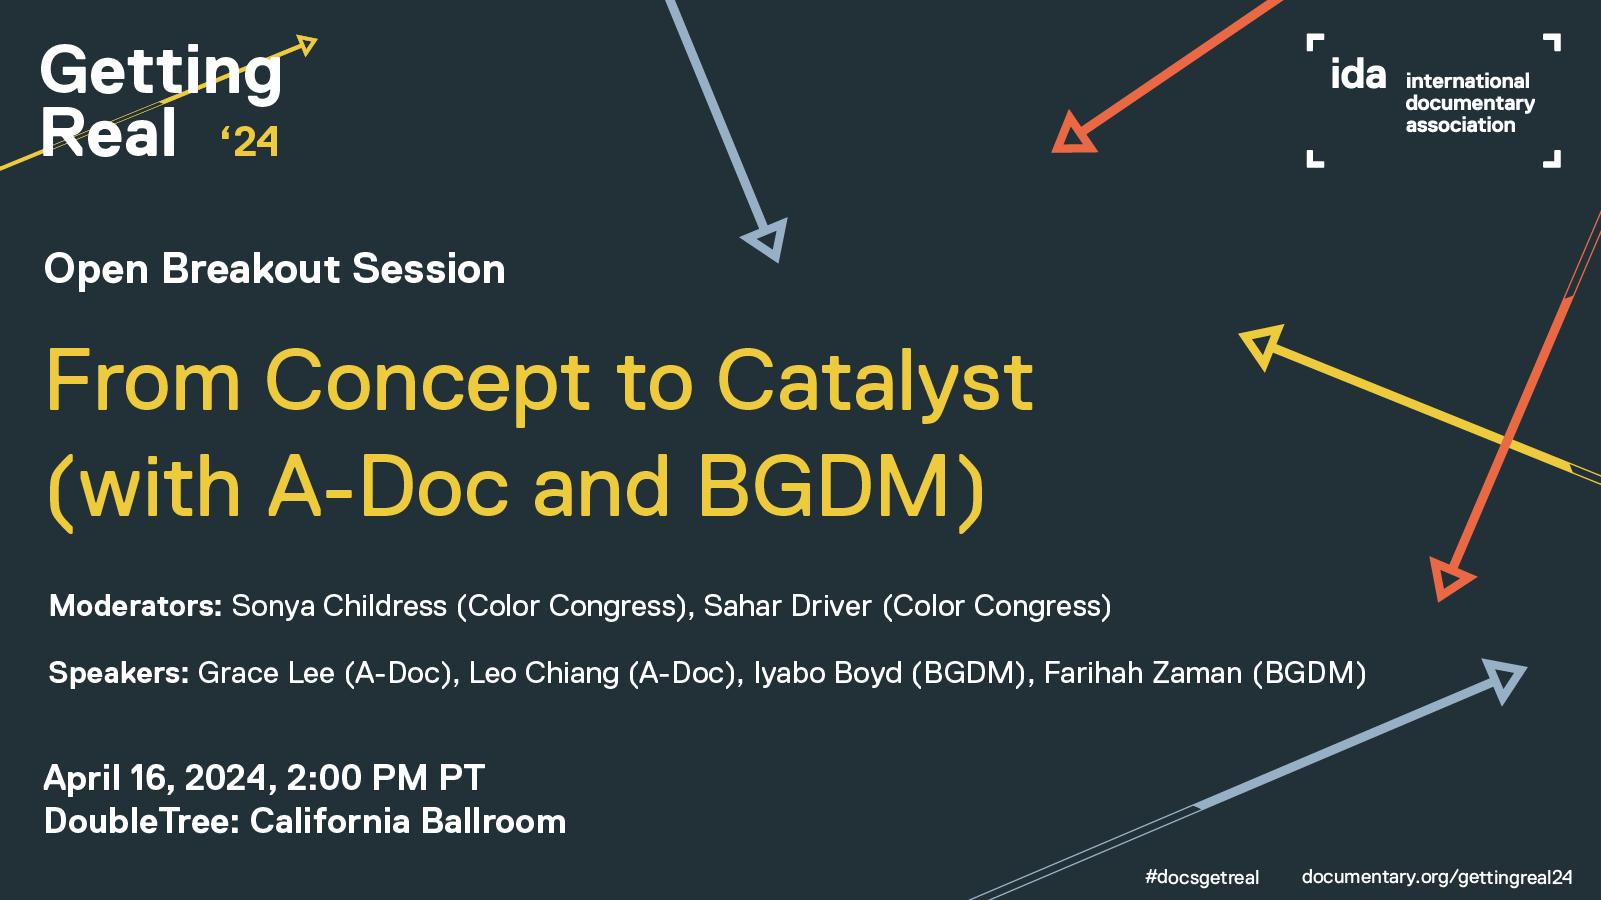 3:45 PM Open Breakout Session: From Concept to Catalyst (with A-Doc and BGDM)